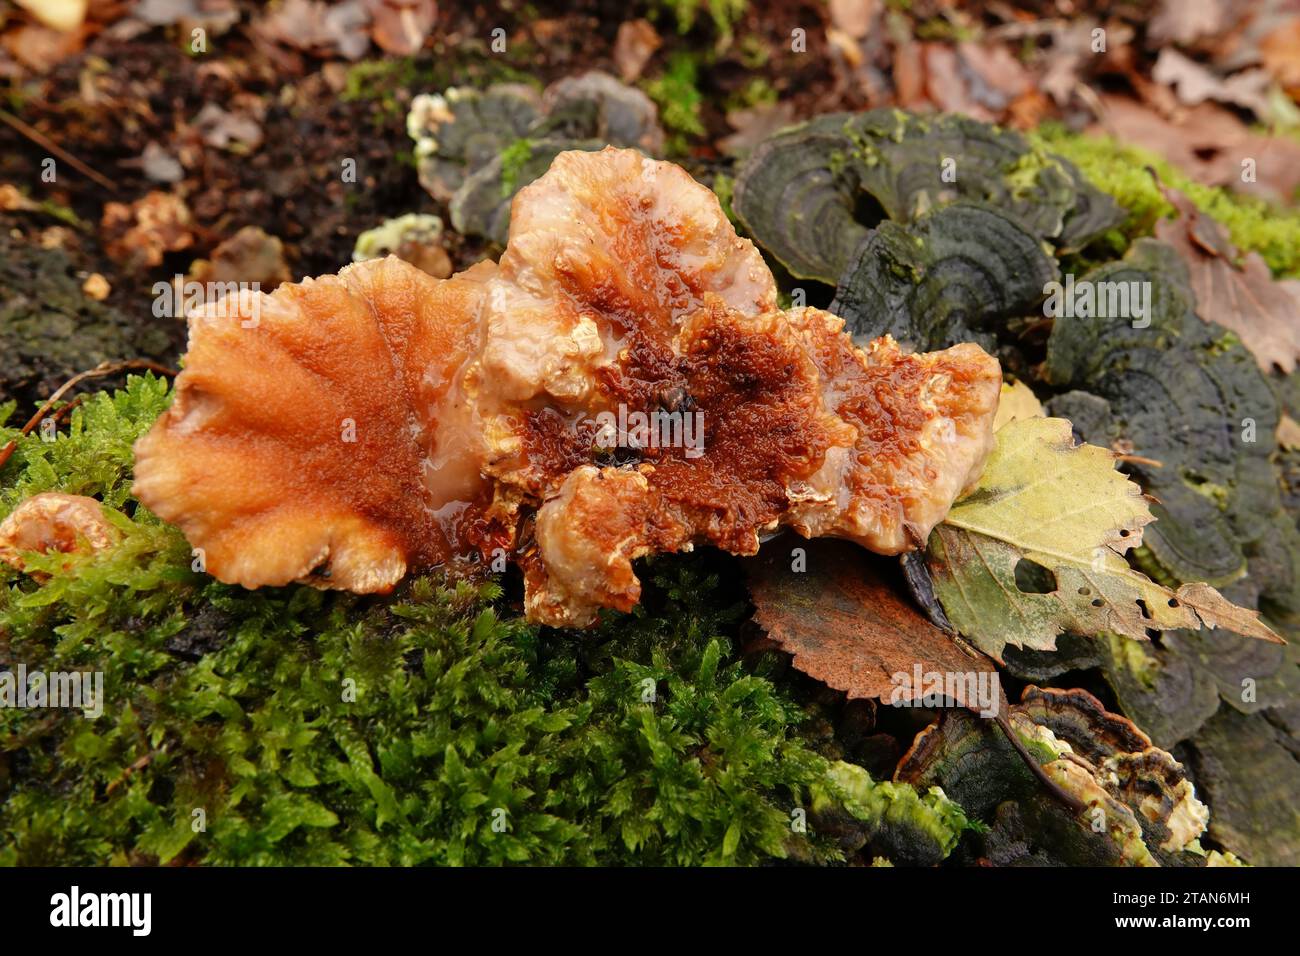 Detailed closeup on a rusty brown form of the Singer - Blushing Rosette, Abortiporus biennis growing on a dead tree stump Stock Photo